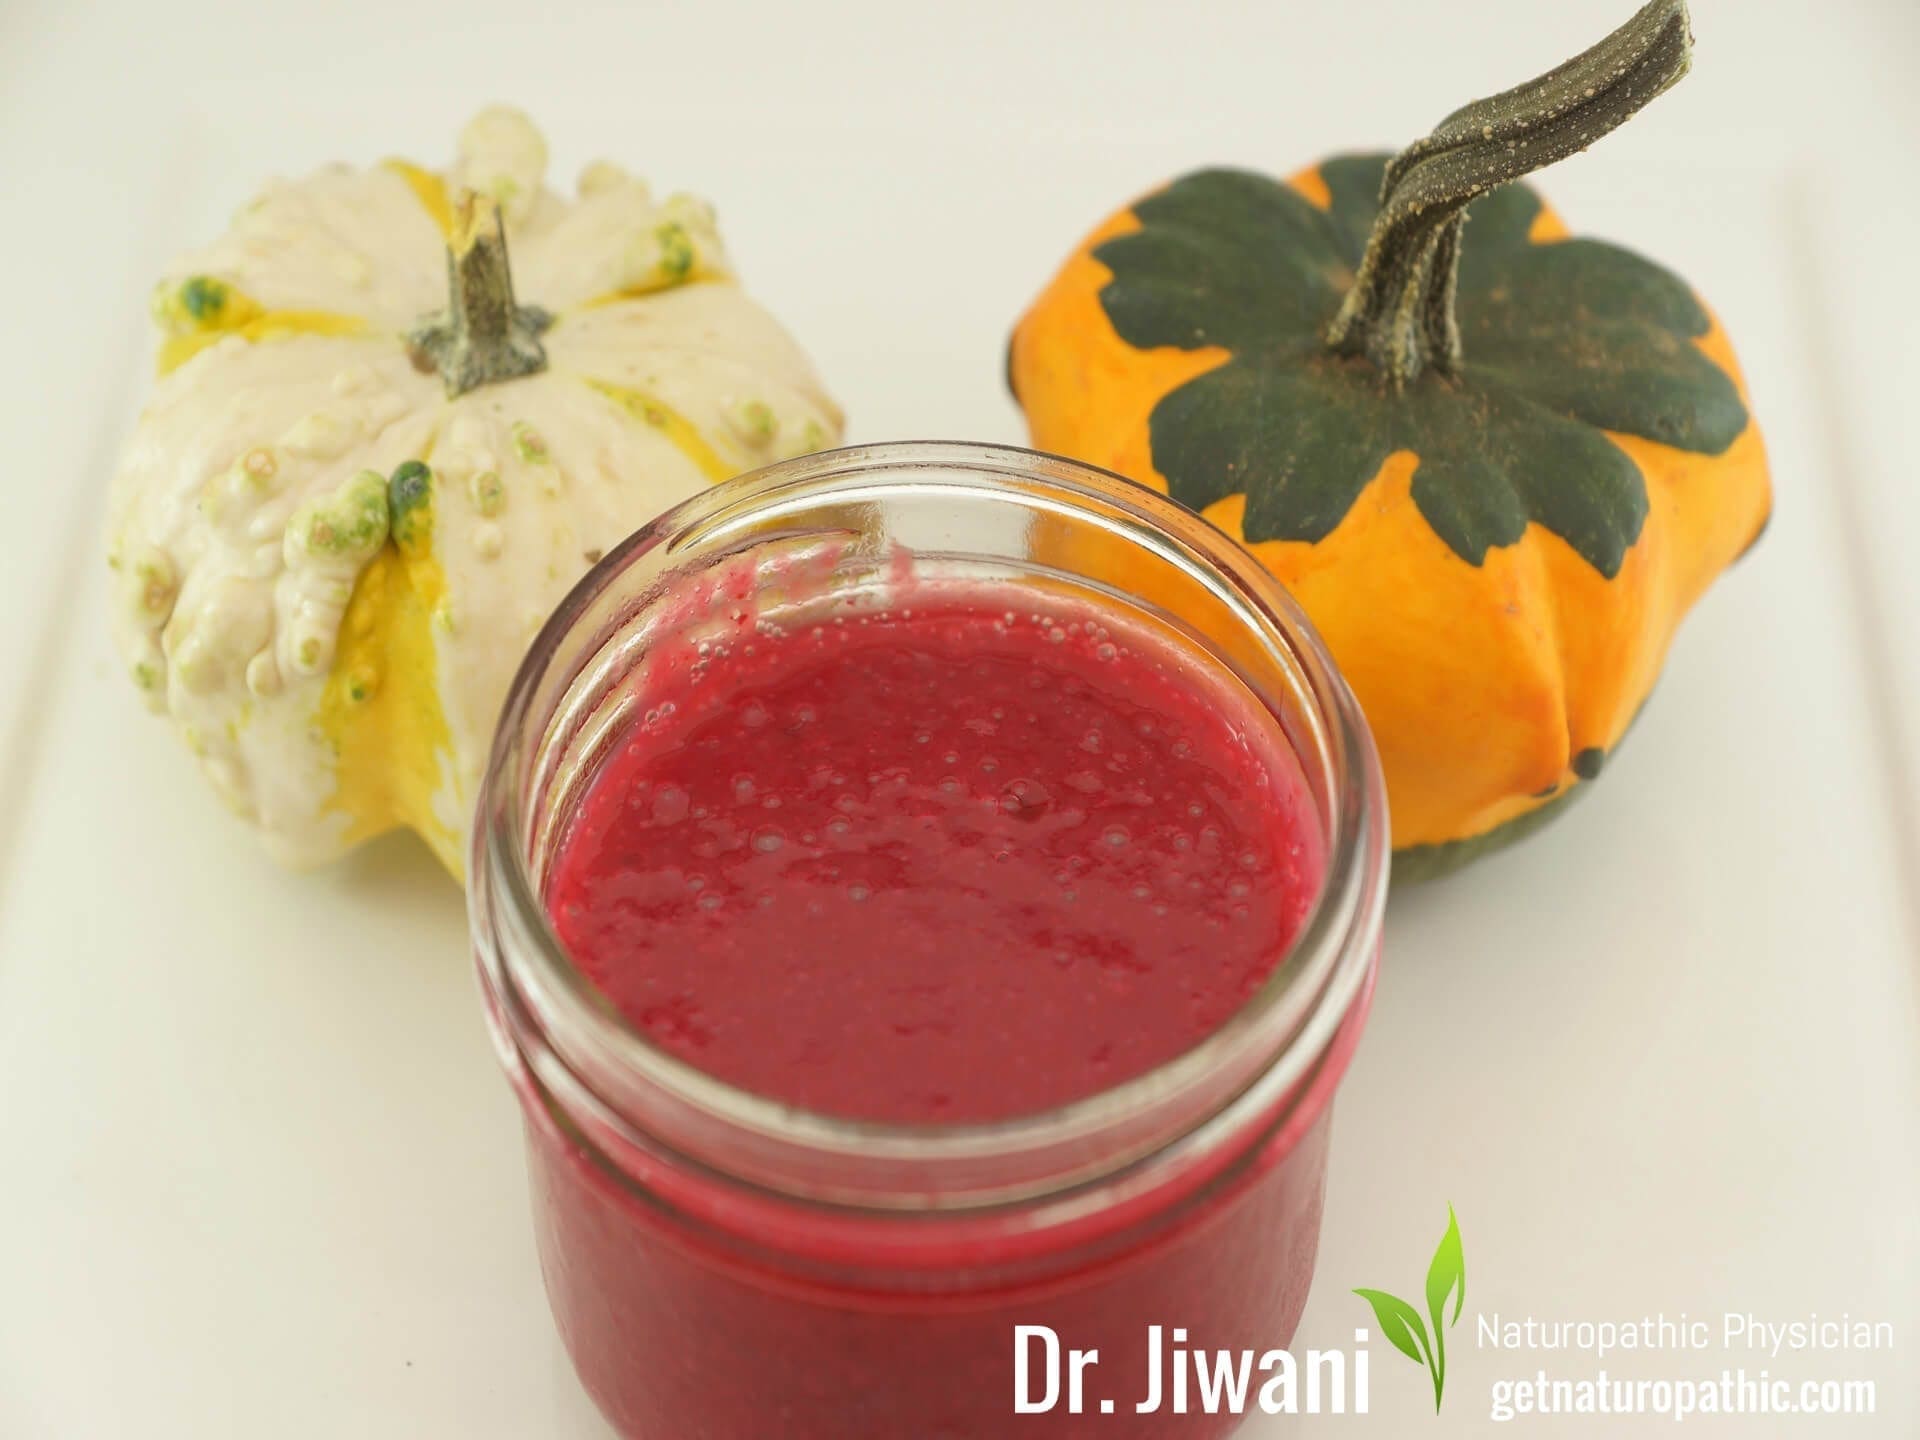 Dr. Jiwani's Low Carb Berry Sauce: Gluten-Free, Egg-Free, Dairy-Free, Soy-Free, Corn-Free, Ideal For Vegan, Paleo, Keto, Diabetic & Candida Diets | Dr. Jiwani's Naturopathic Nuggets Blog